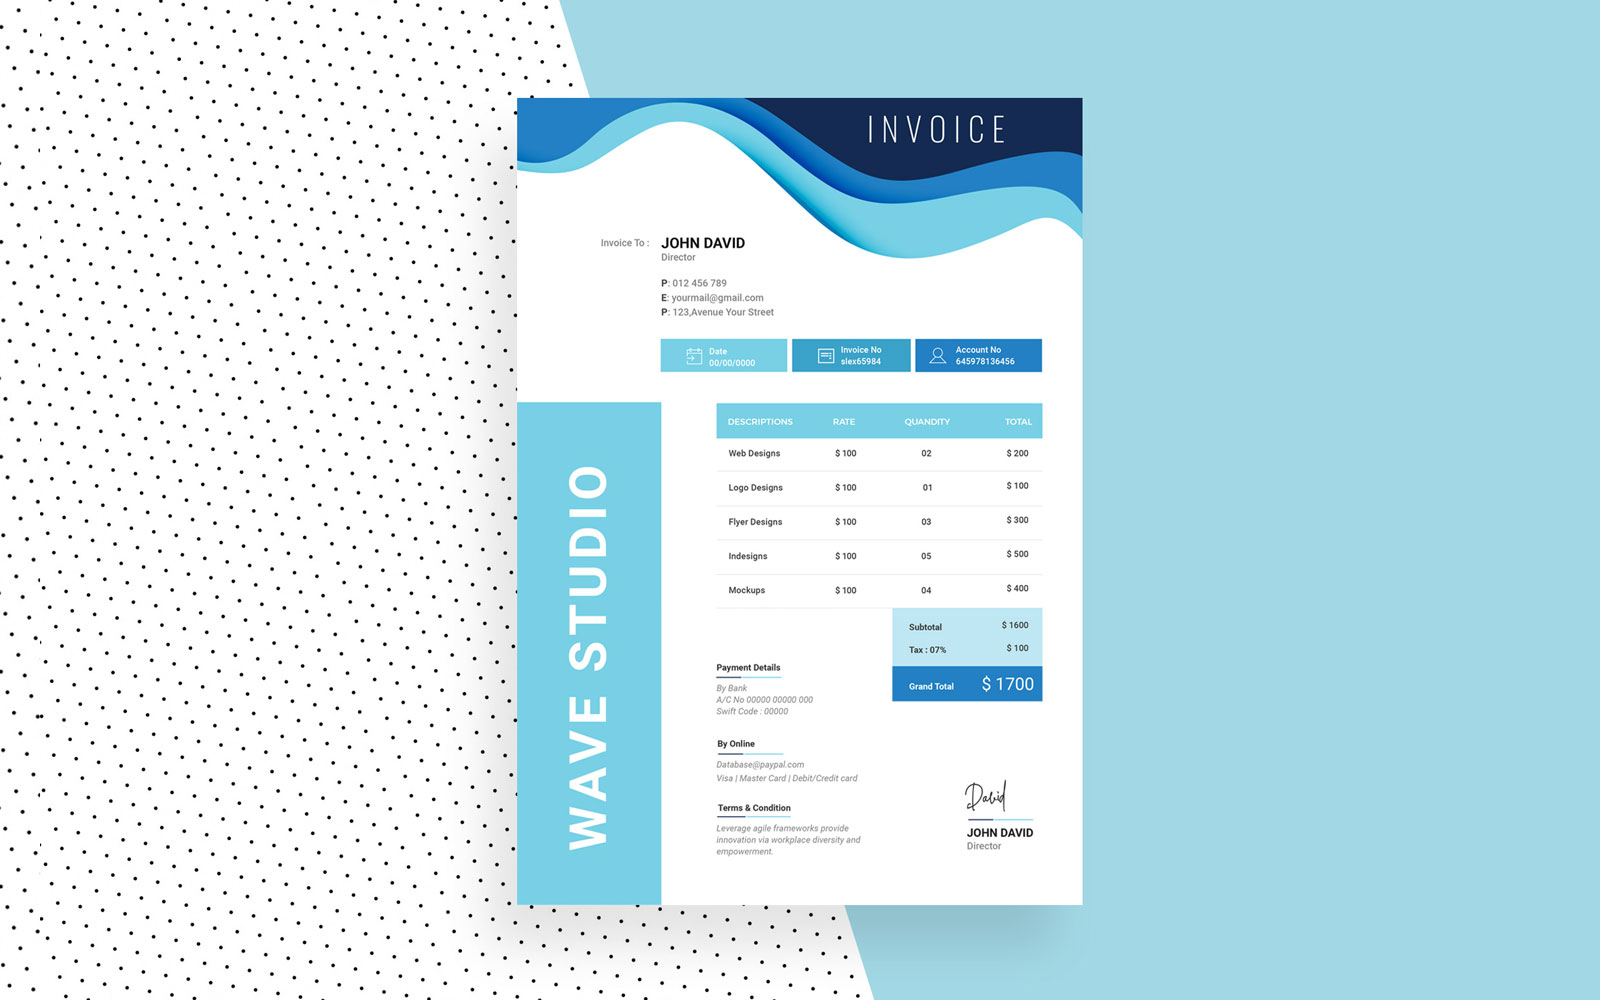 Minimal Invoice - Blue and whte Wave Design Template